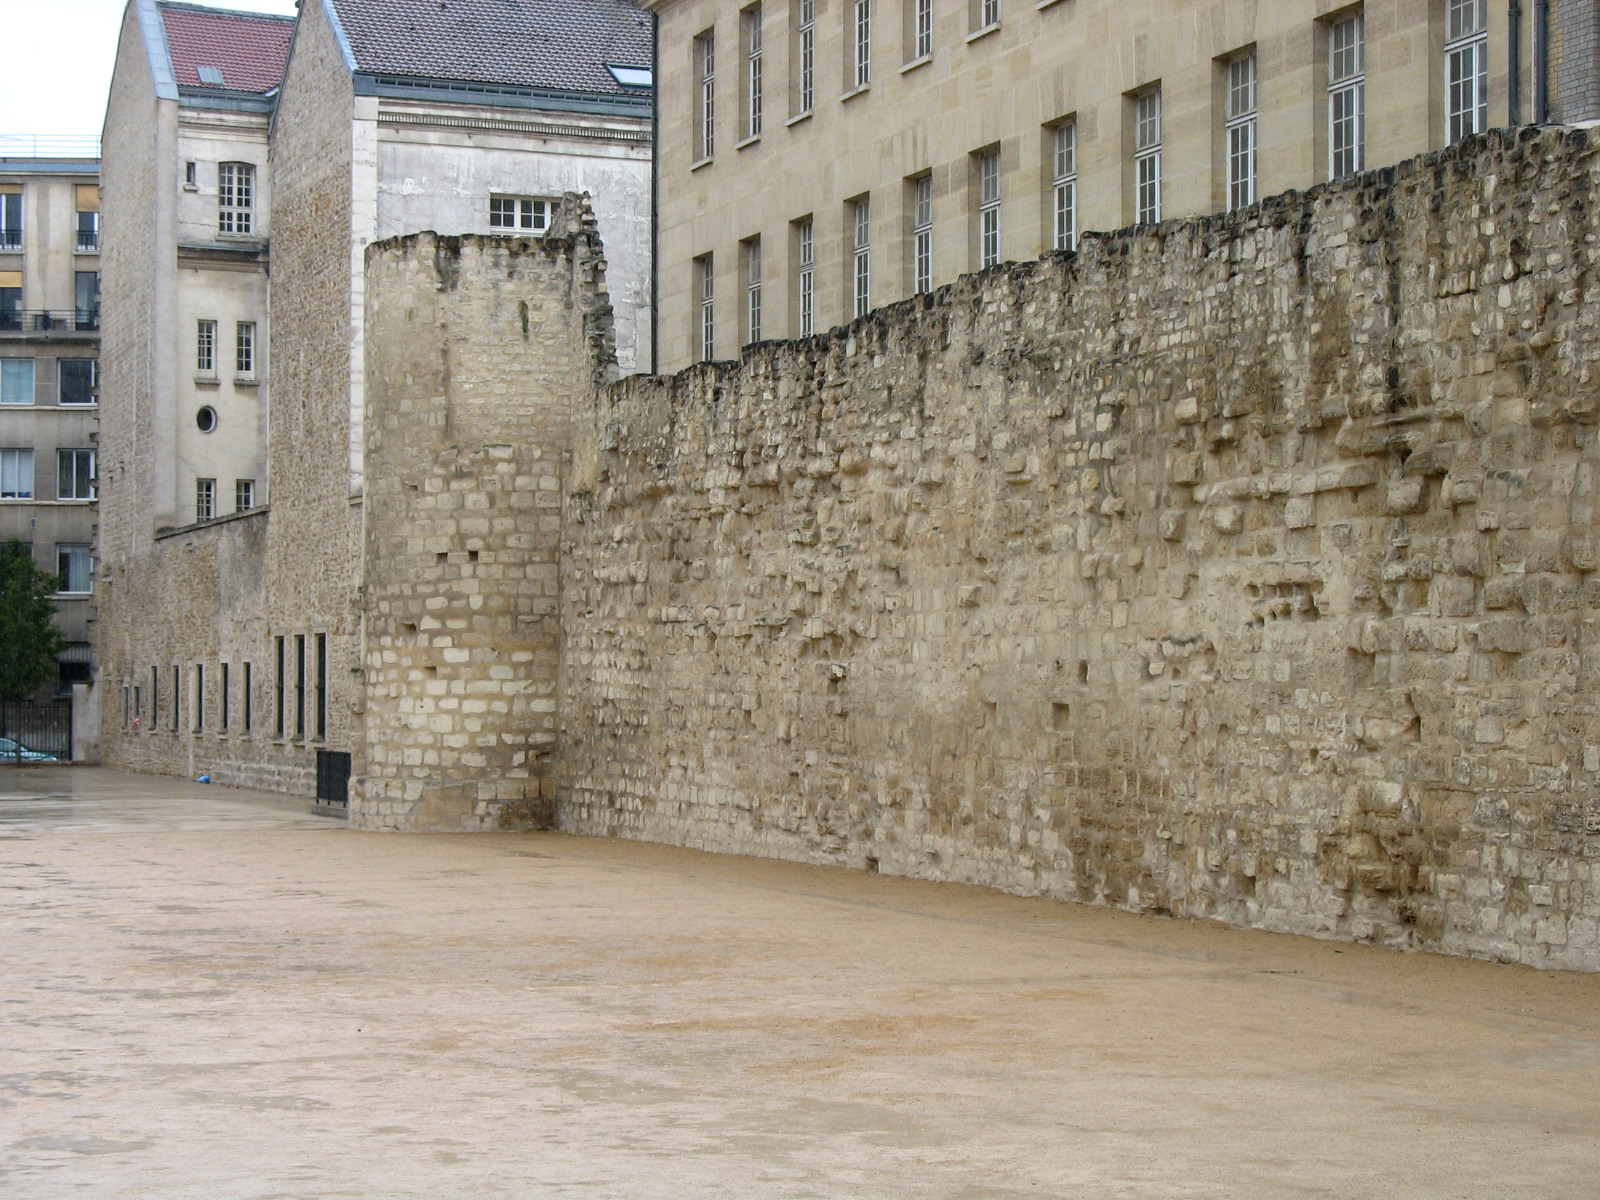 The Wall of King Philip II of France (Philip Augustus) in Paris. Wikipedia